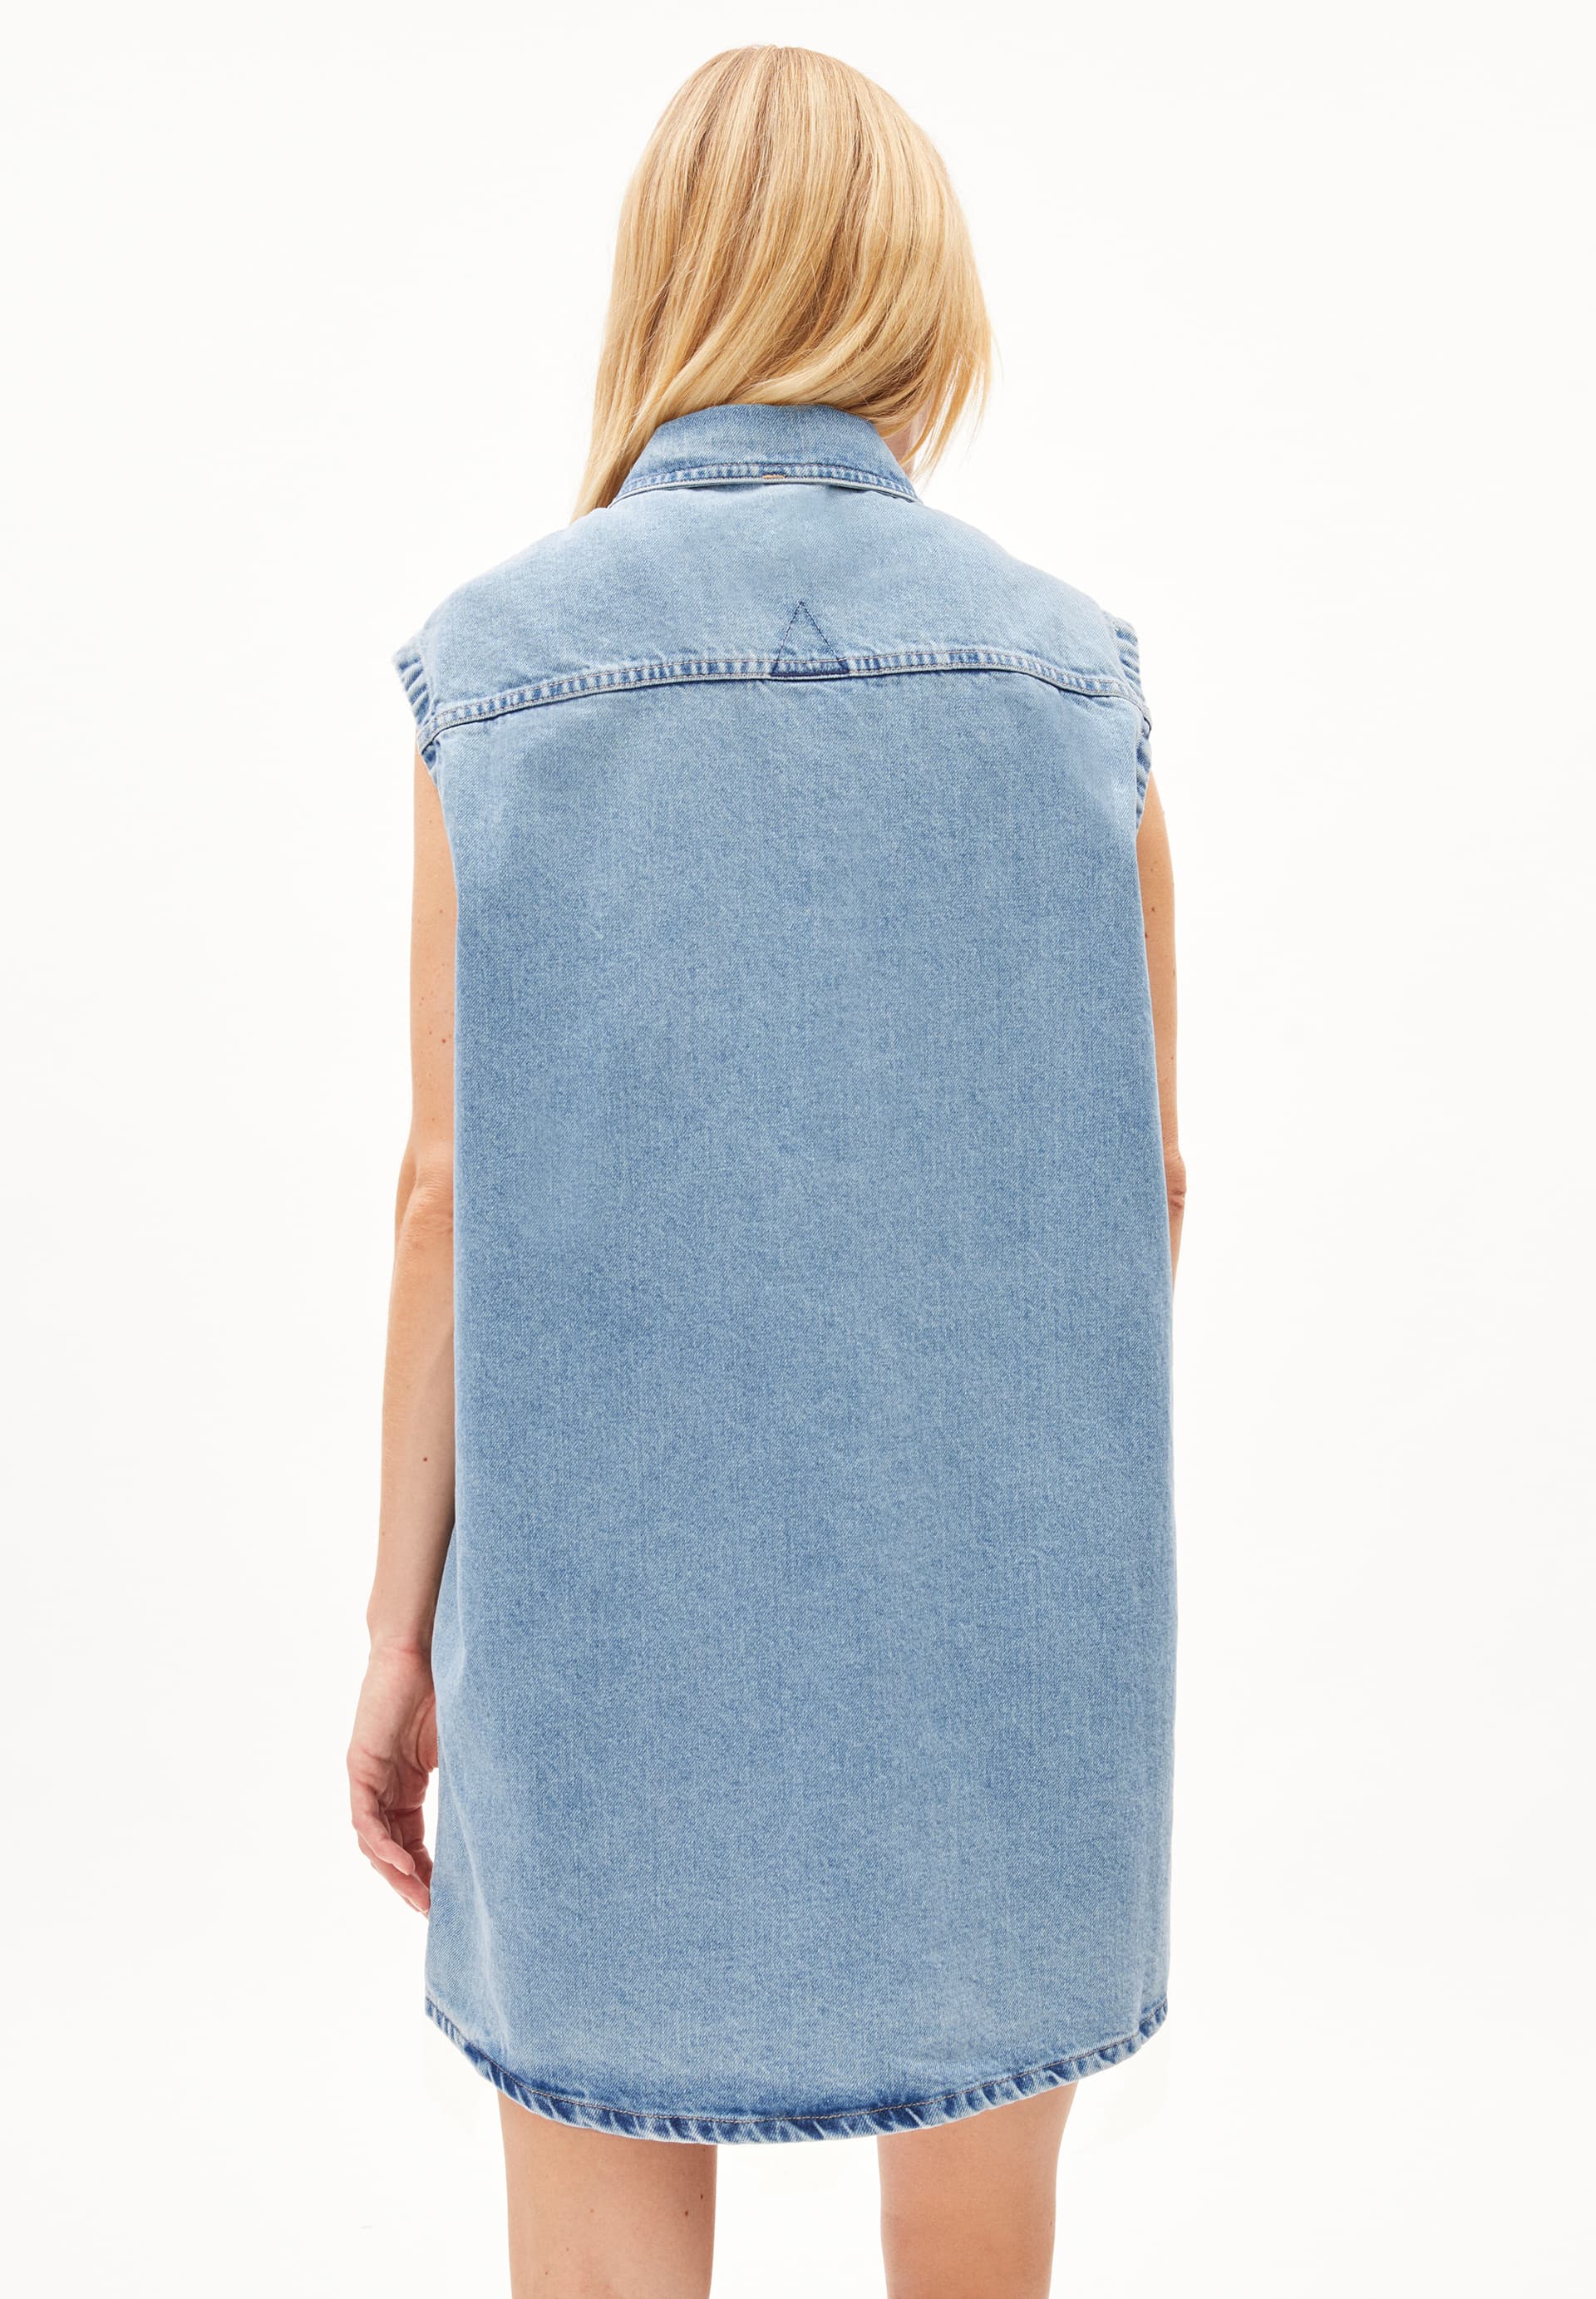 TAALUHLA Denim Dress Slim Fit made of recycled Cotton